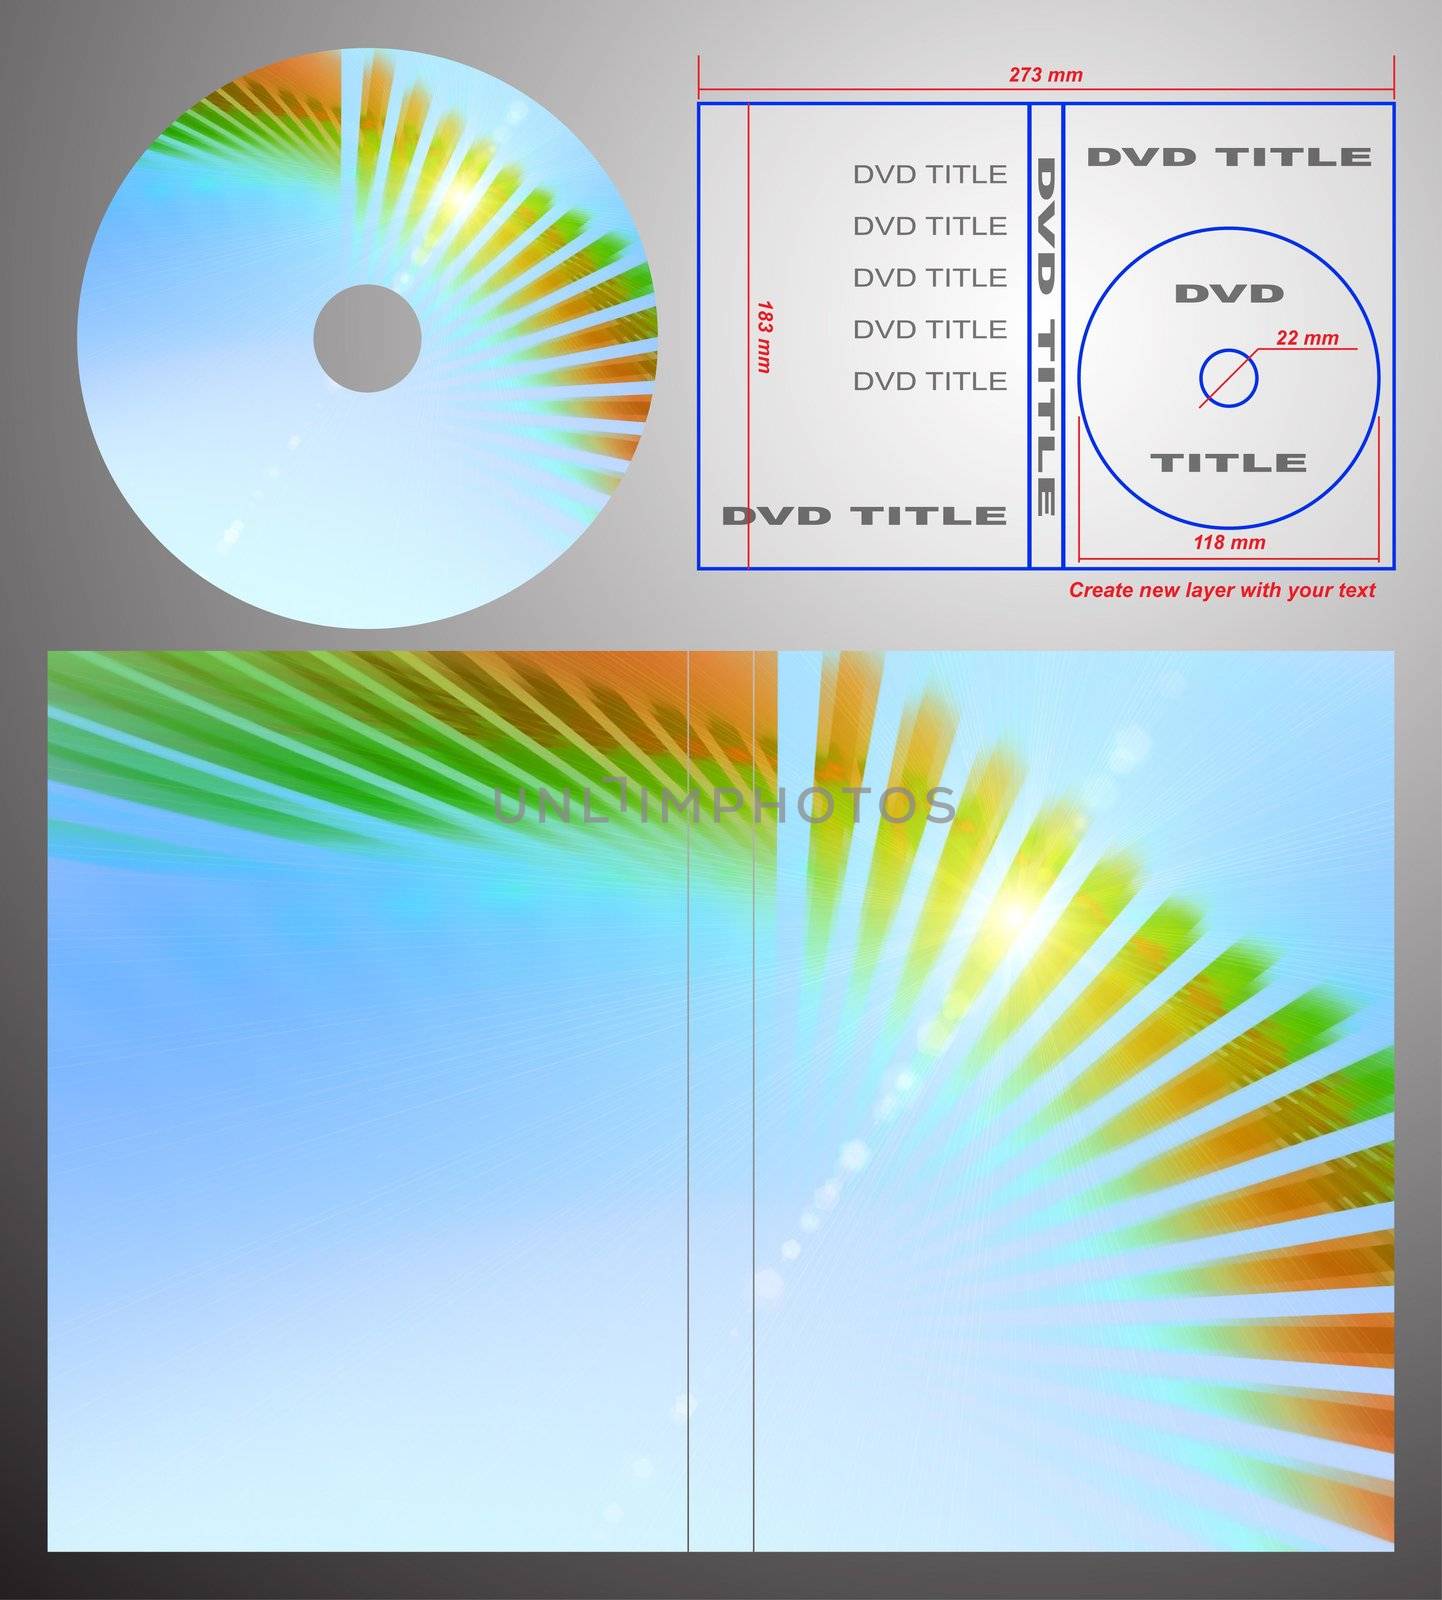 Abstract design template for dvd label and box-cover. Based on rendering of 3d fractal graphics. For using create new layer with your text.